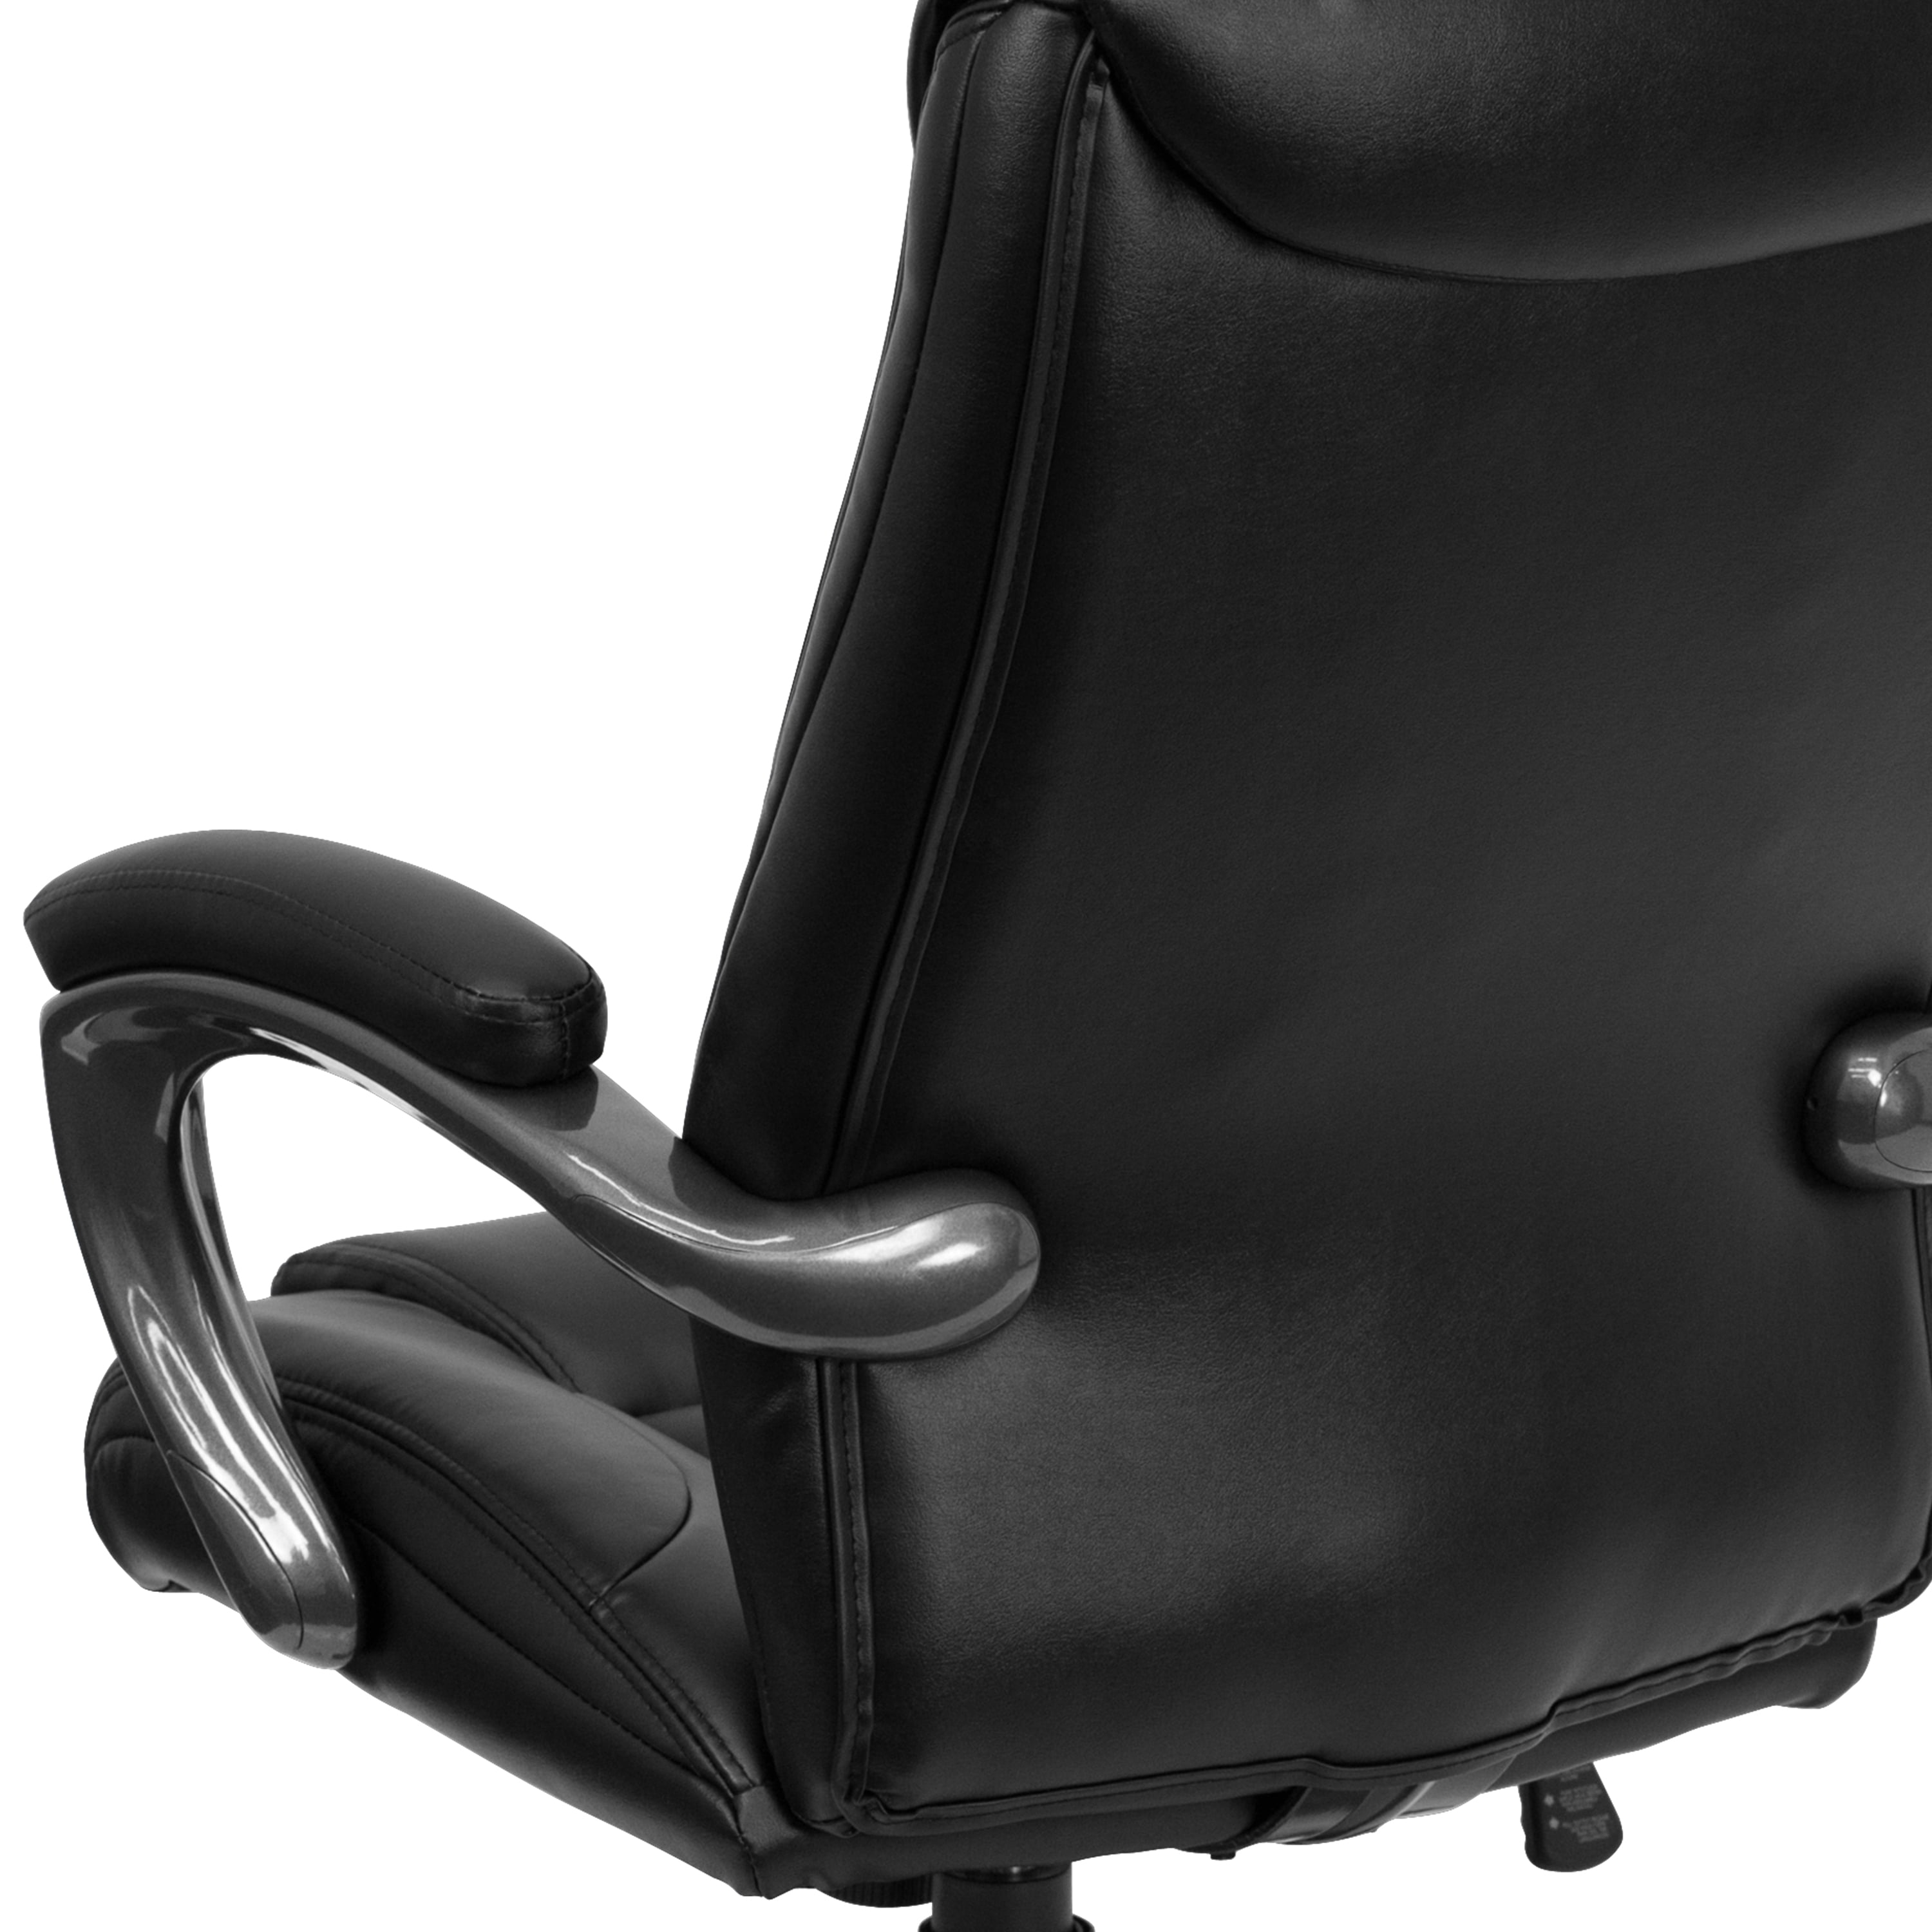 High Back Black Leather Executive Office Chair with Memory Foam Padding ,  #FF-0158-14 - H2O Furniture